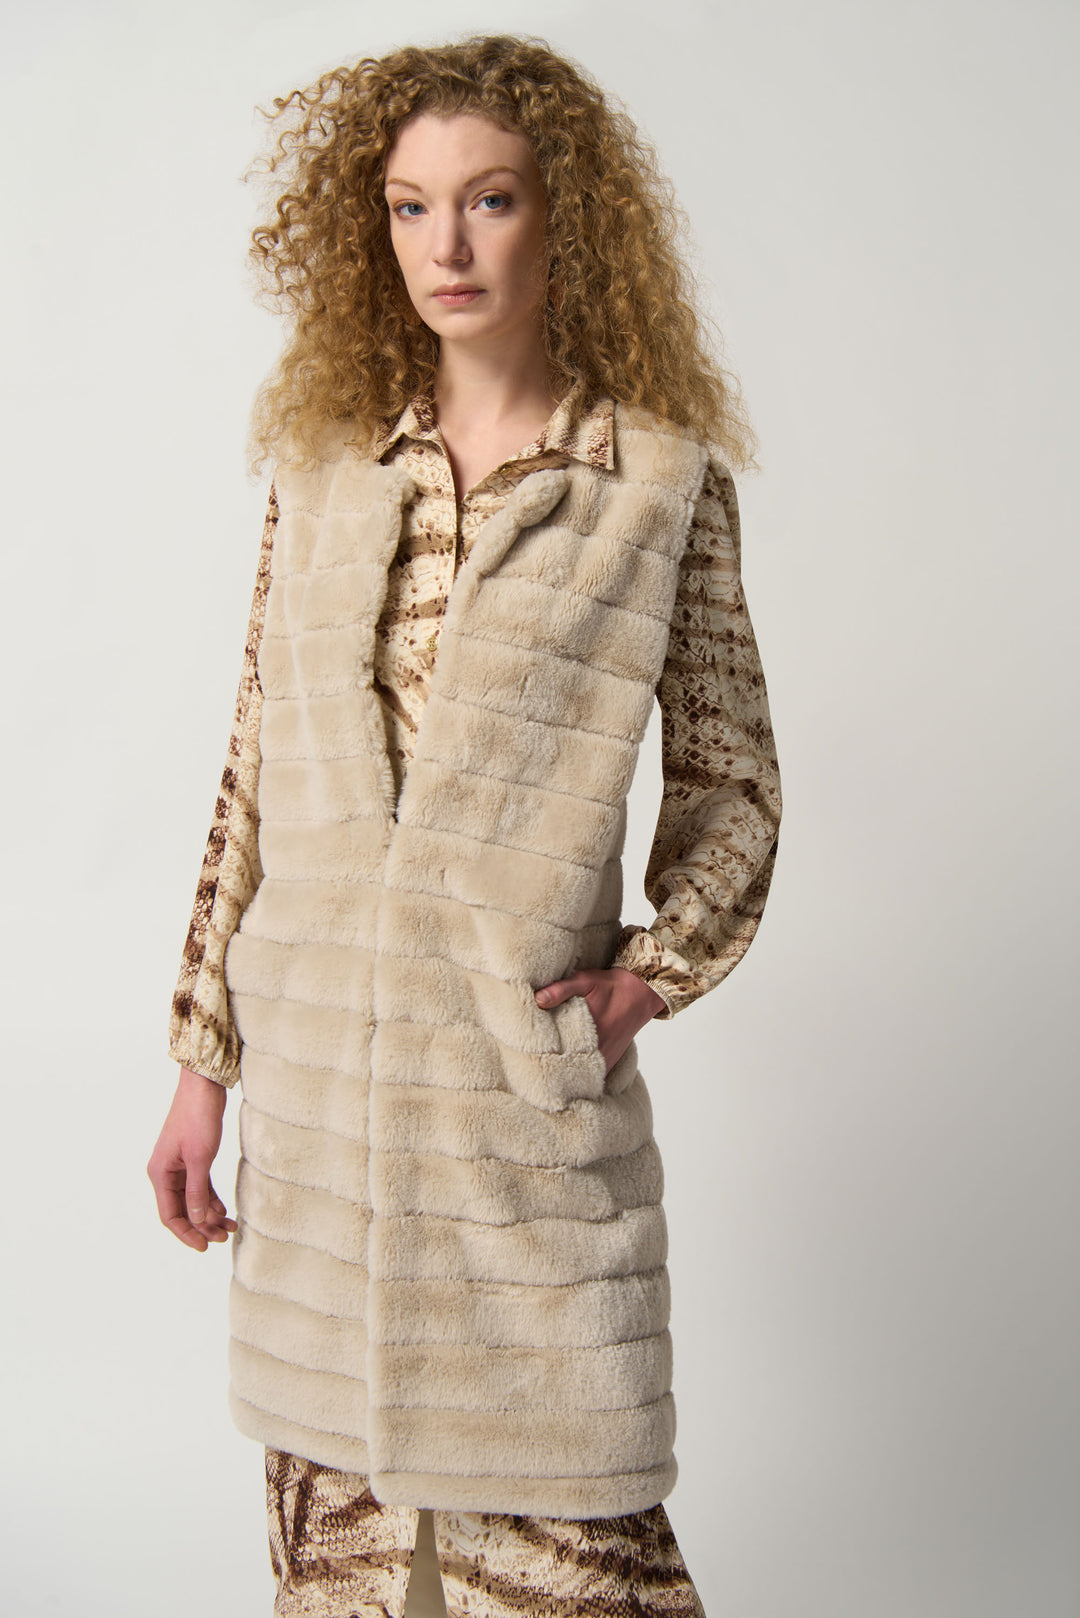 Crafted from super soft and lightweight faux fur, it features a crew neck and pockets, with a straight shape overall for effortlessly elegant comfort. 